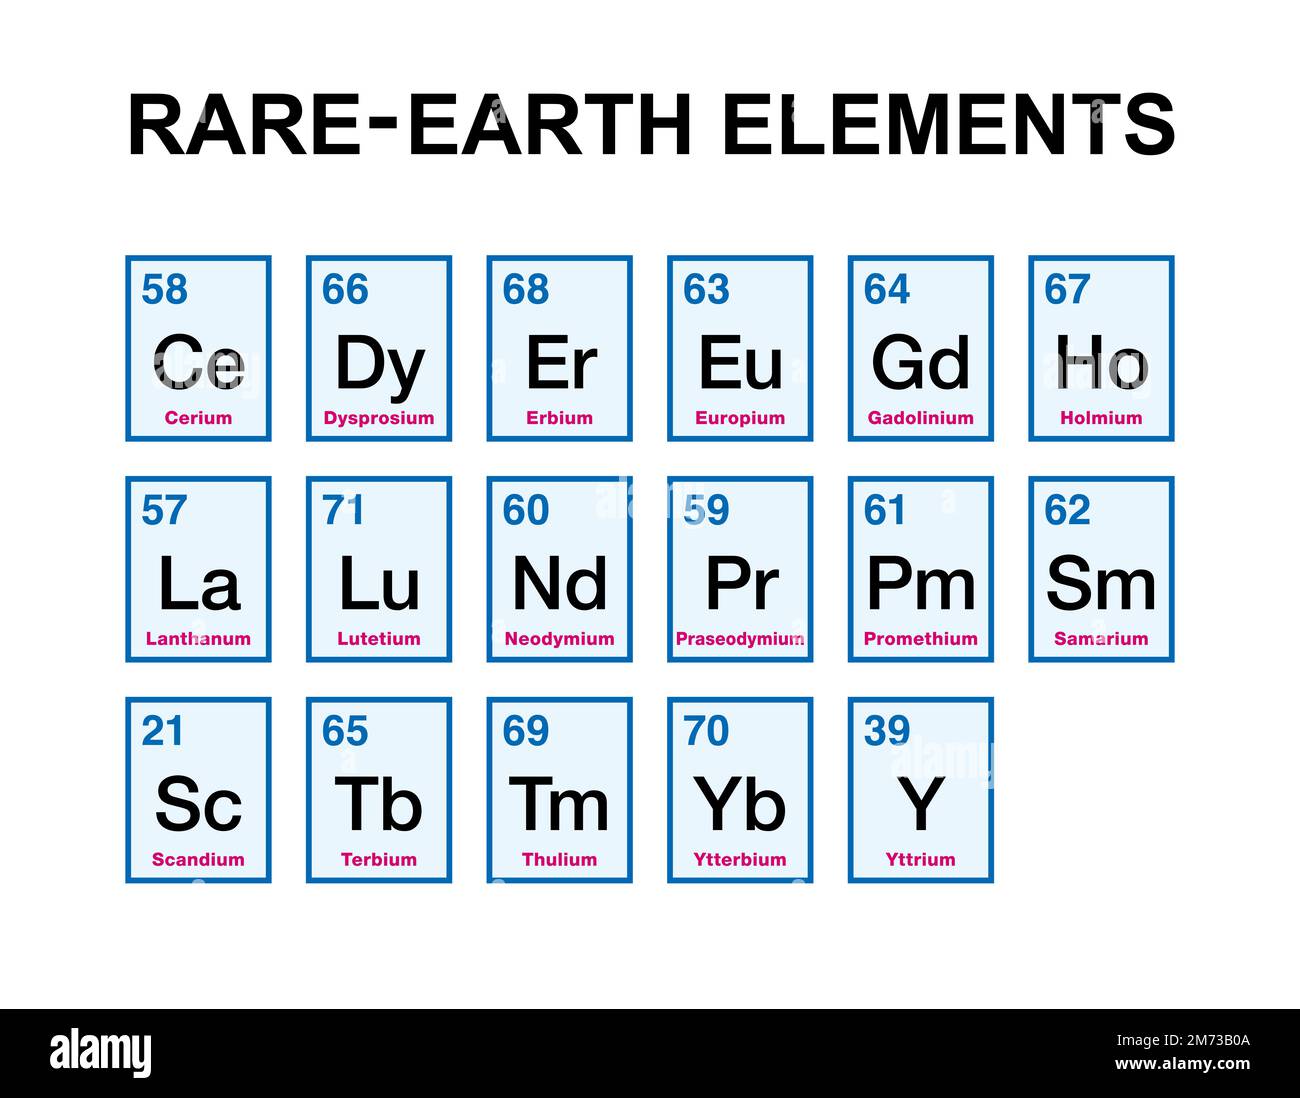 Rare-earth elements, also known as rare-earth metals, in alphabetical order, with atomic numbers and chemical symbols. A set of 17 heavy metals. Stock Photo